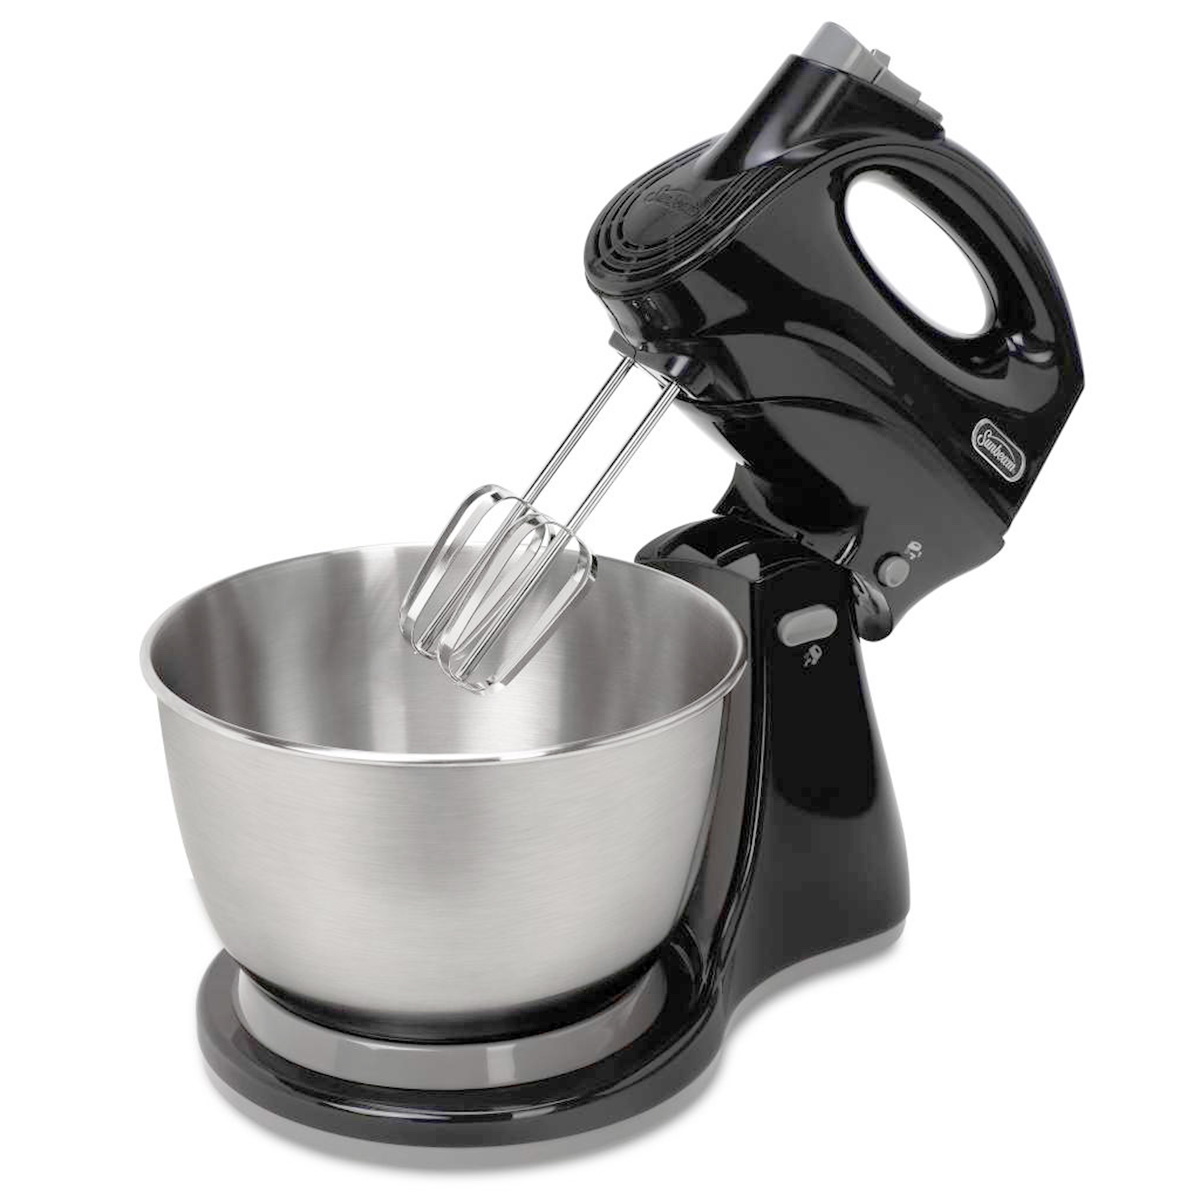 RIVAL FPSBHS0302-NP Hand and Stand Mixer, 250 W, Stainless Steel, Black - 2